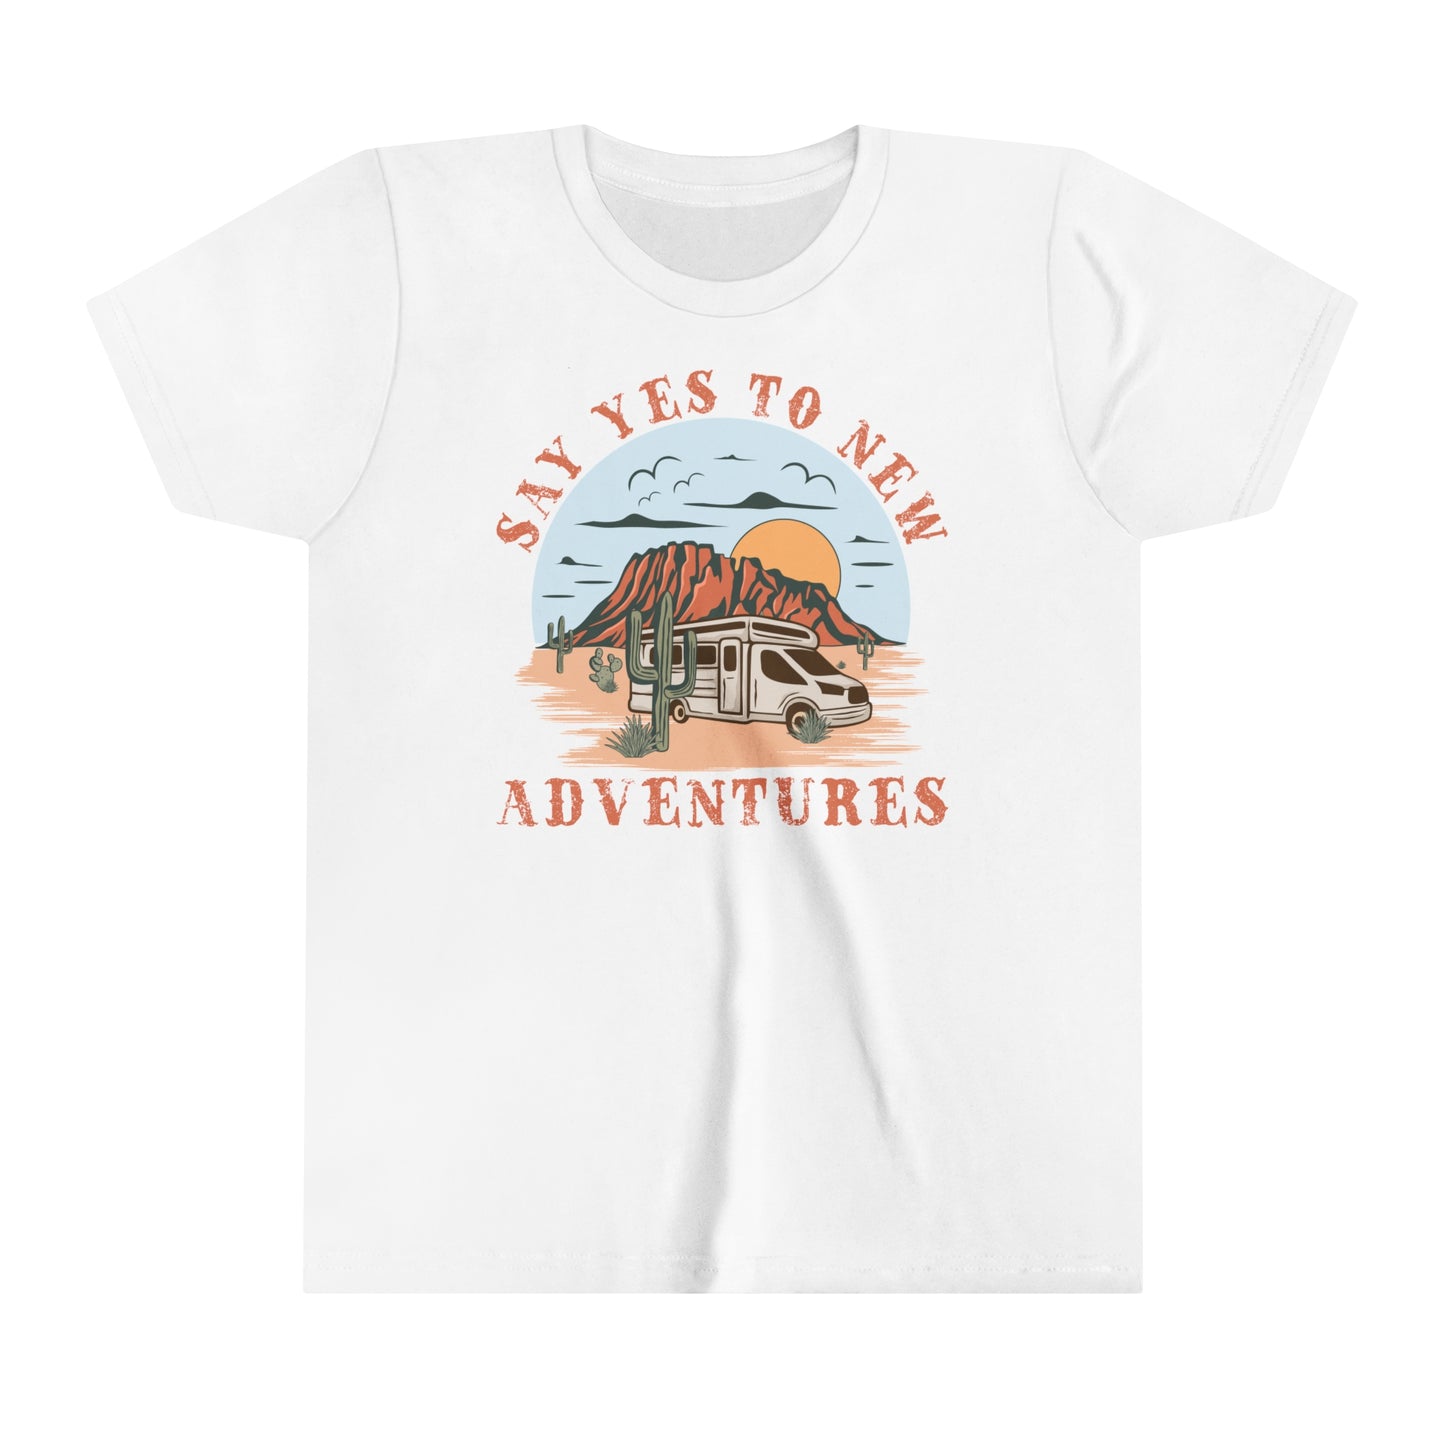 Say Yes To New Adventures | Youth Adventure T-Shirt | Retro Western Kid's Tee